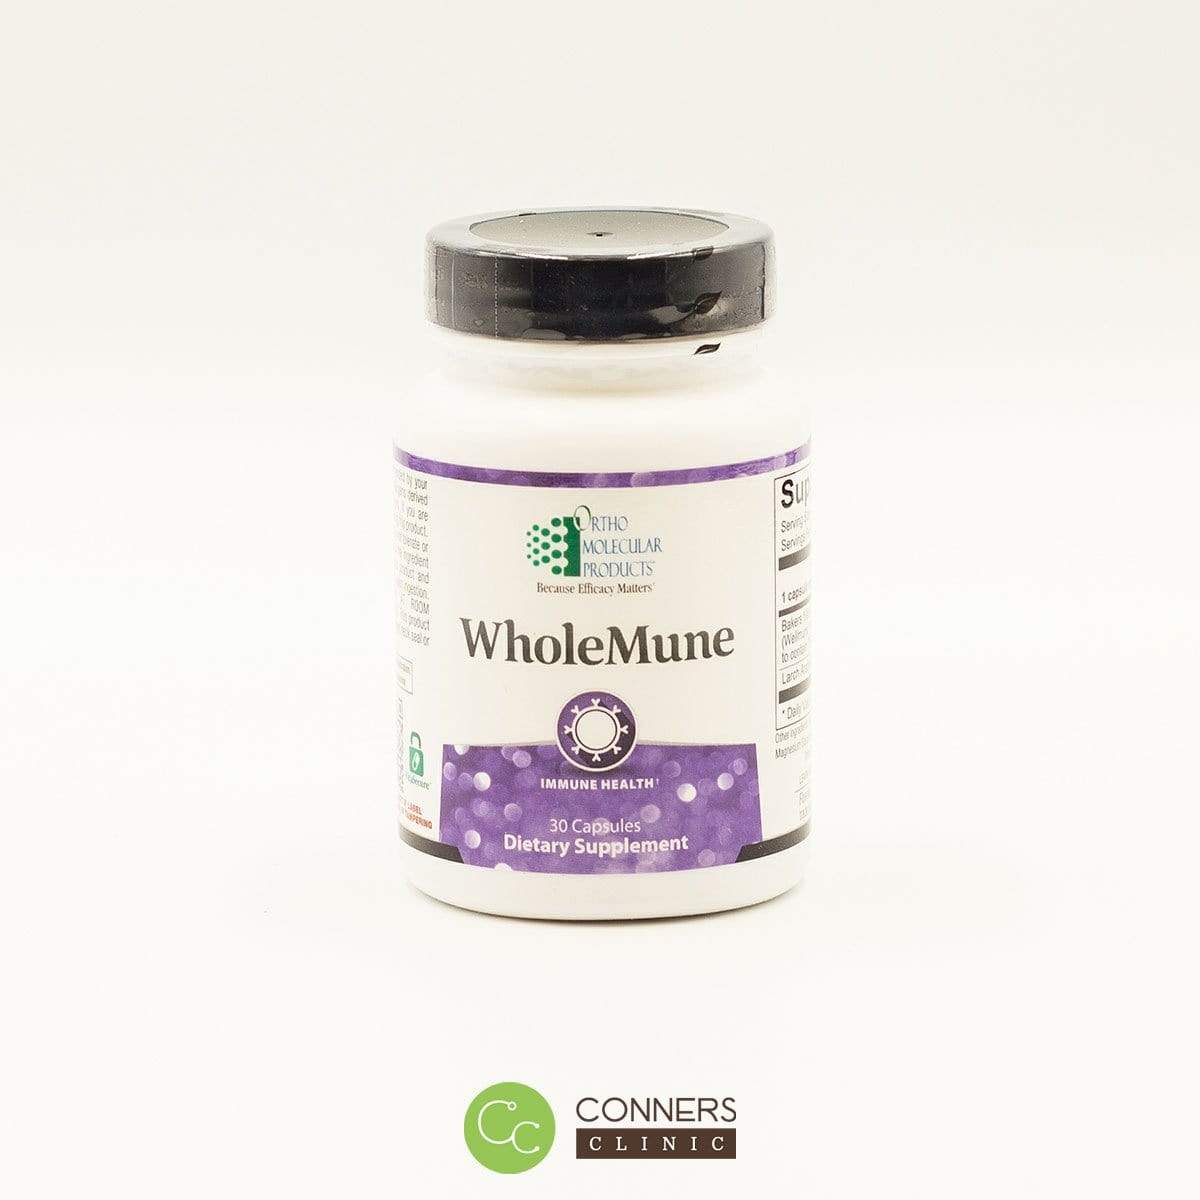 WholeMune - 30 Capsules Ortho-Molecular Supplement - Conners Clinic